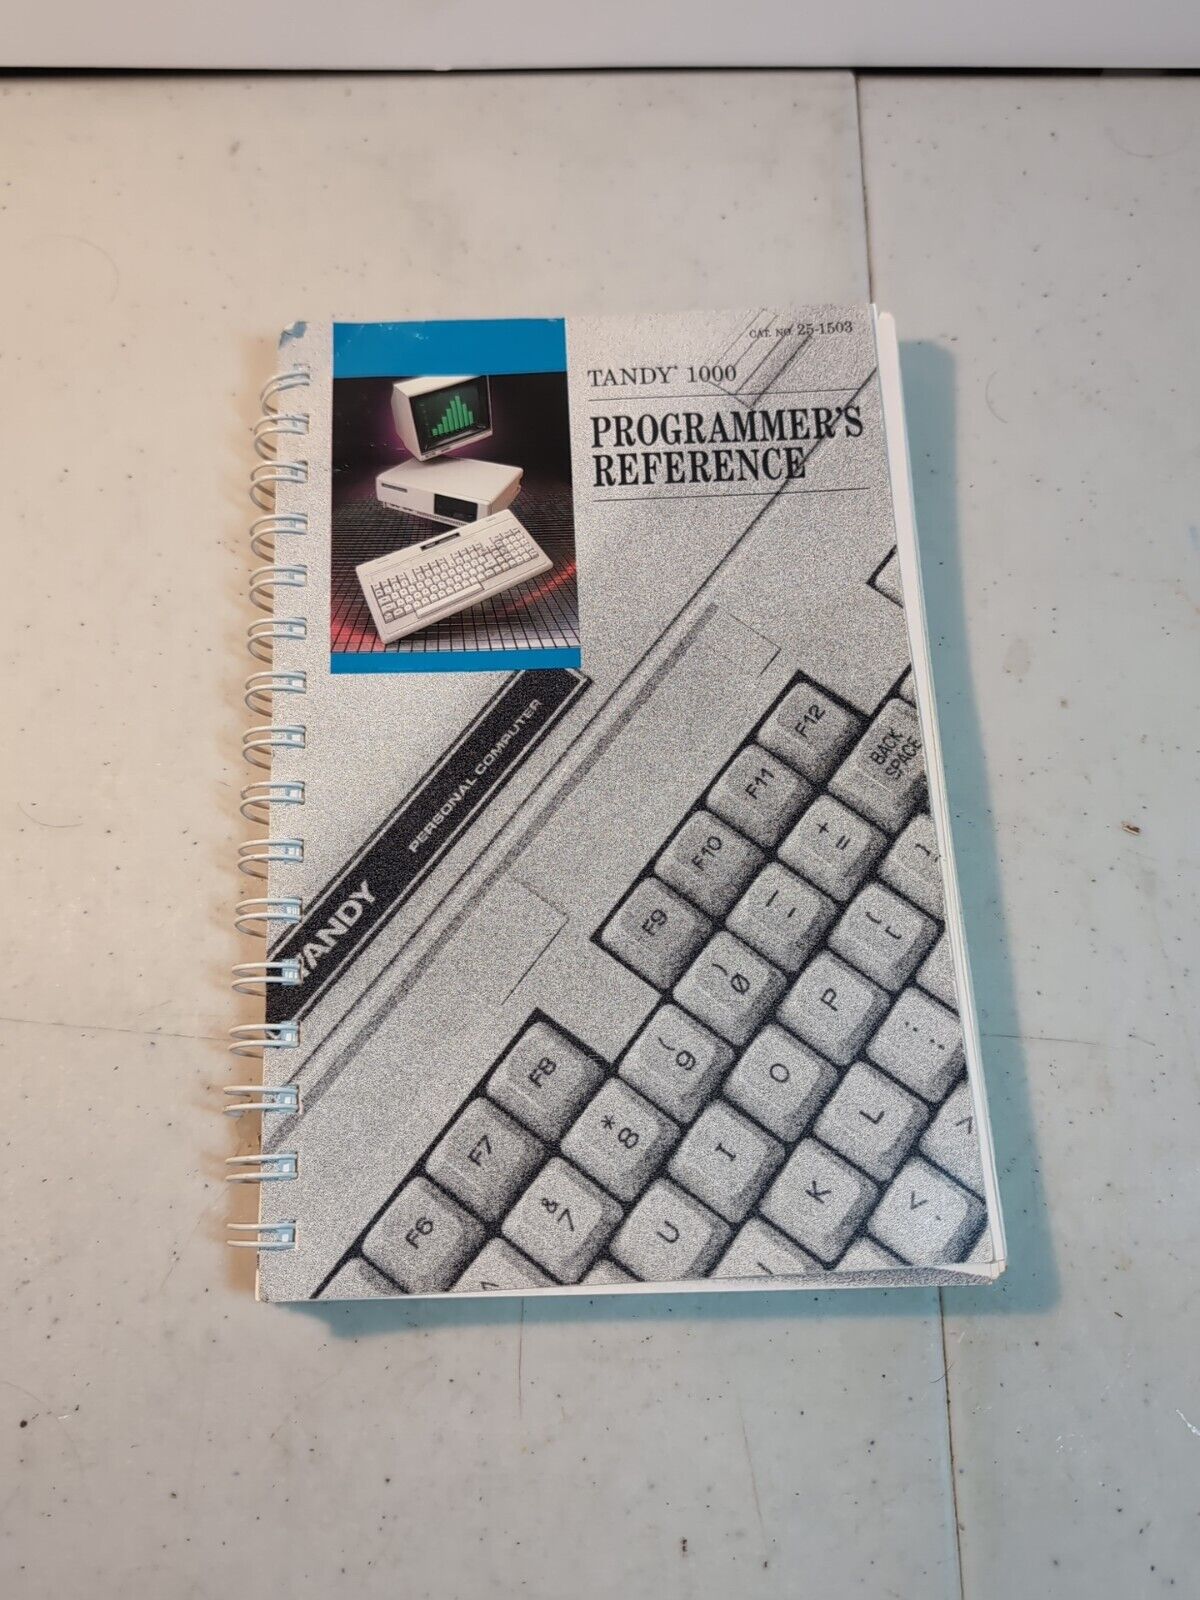 Tandy 1000 Programmers Reference Manual  Vintage CAT. NO. 25-1503